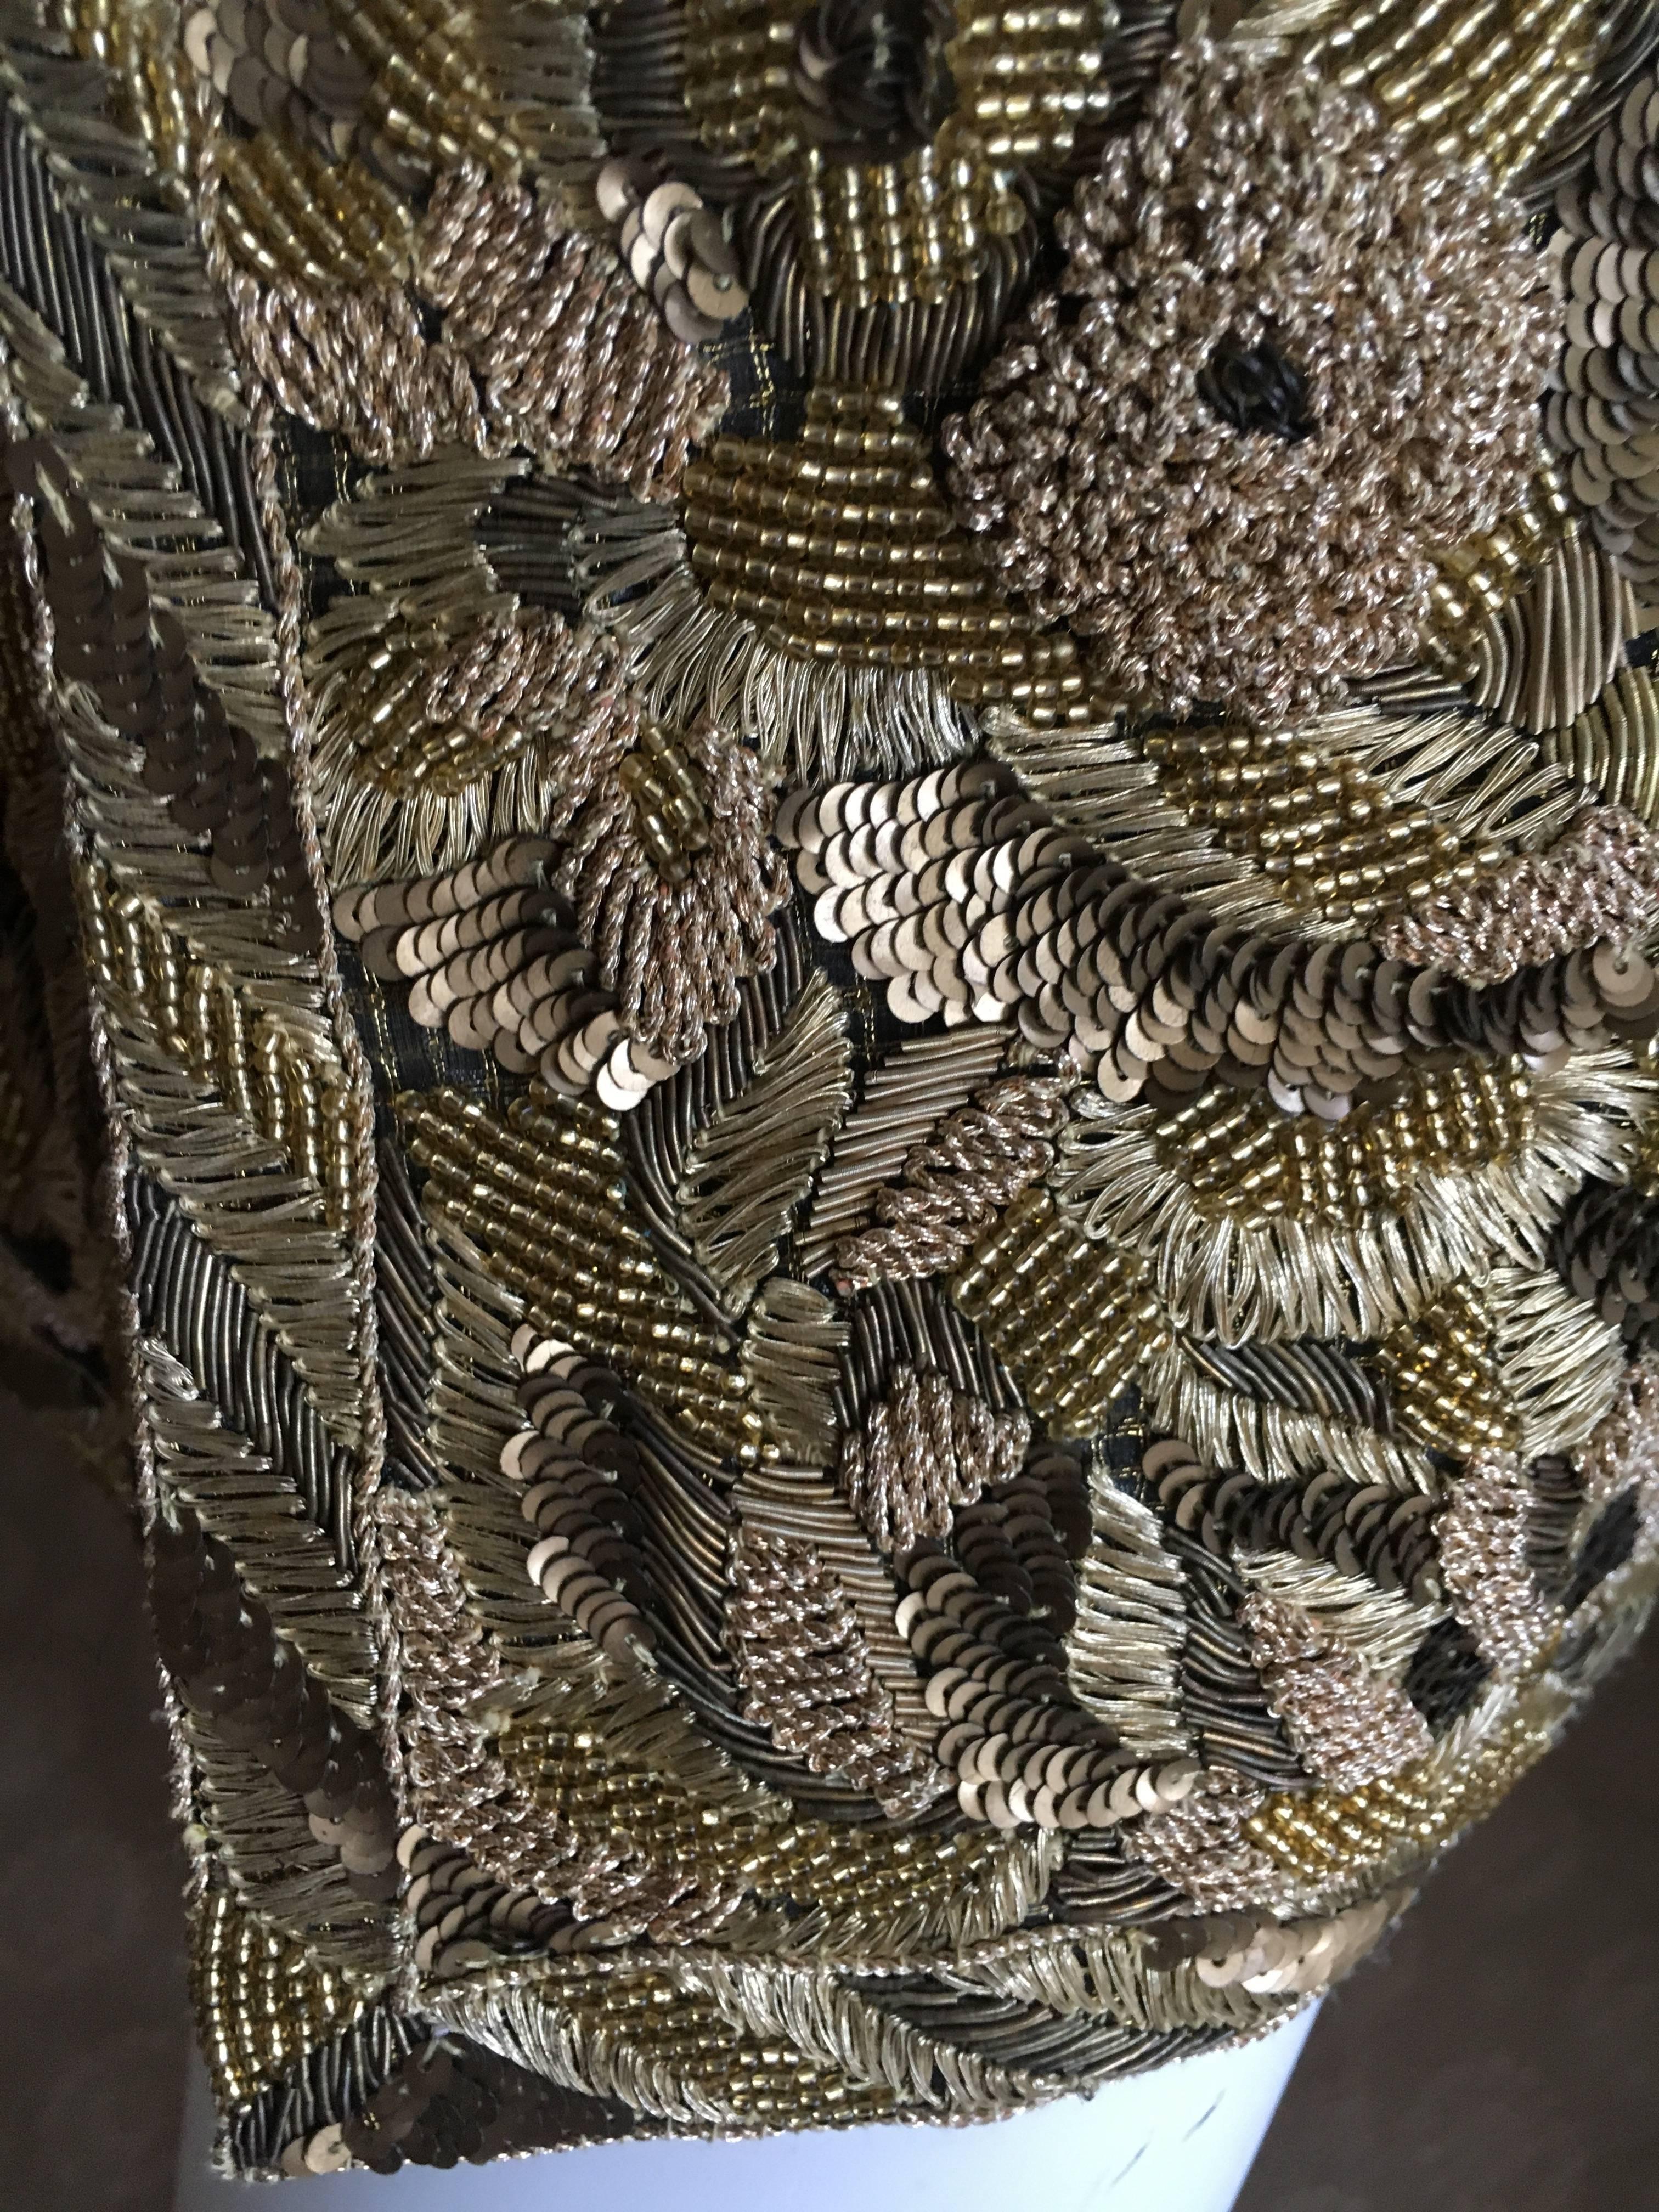 Astonishing Haute Couture gold embellished long jacket or mini dress from Pierre Balmain.
Numbered , from Fall 1998, this was designed by Oscar de la Renta, the beadwork executed by the house of Lesage.
The hand embellished beadwork must have